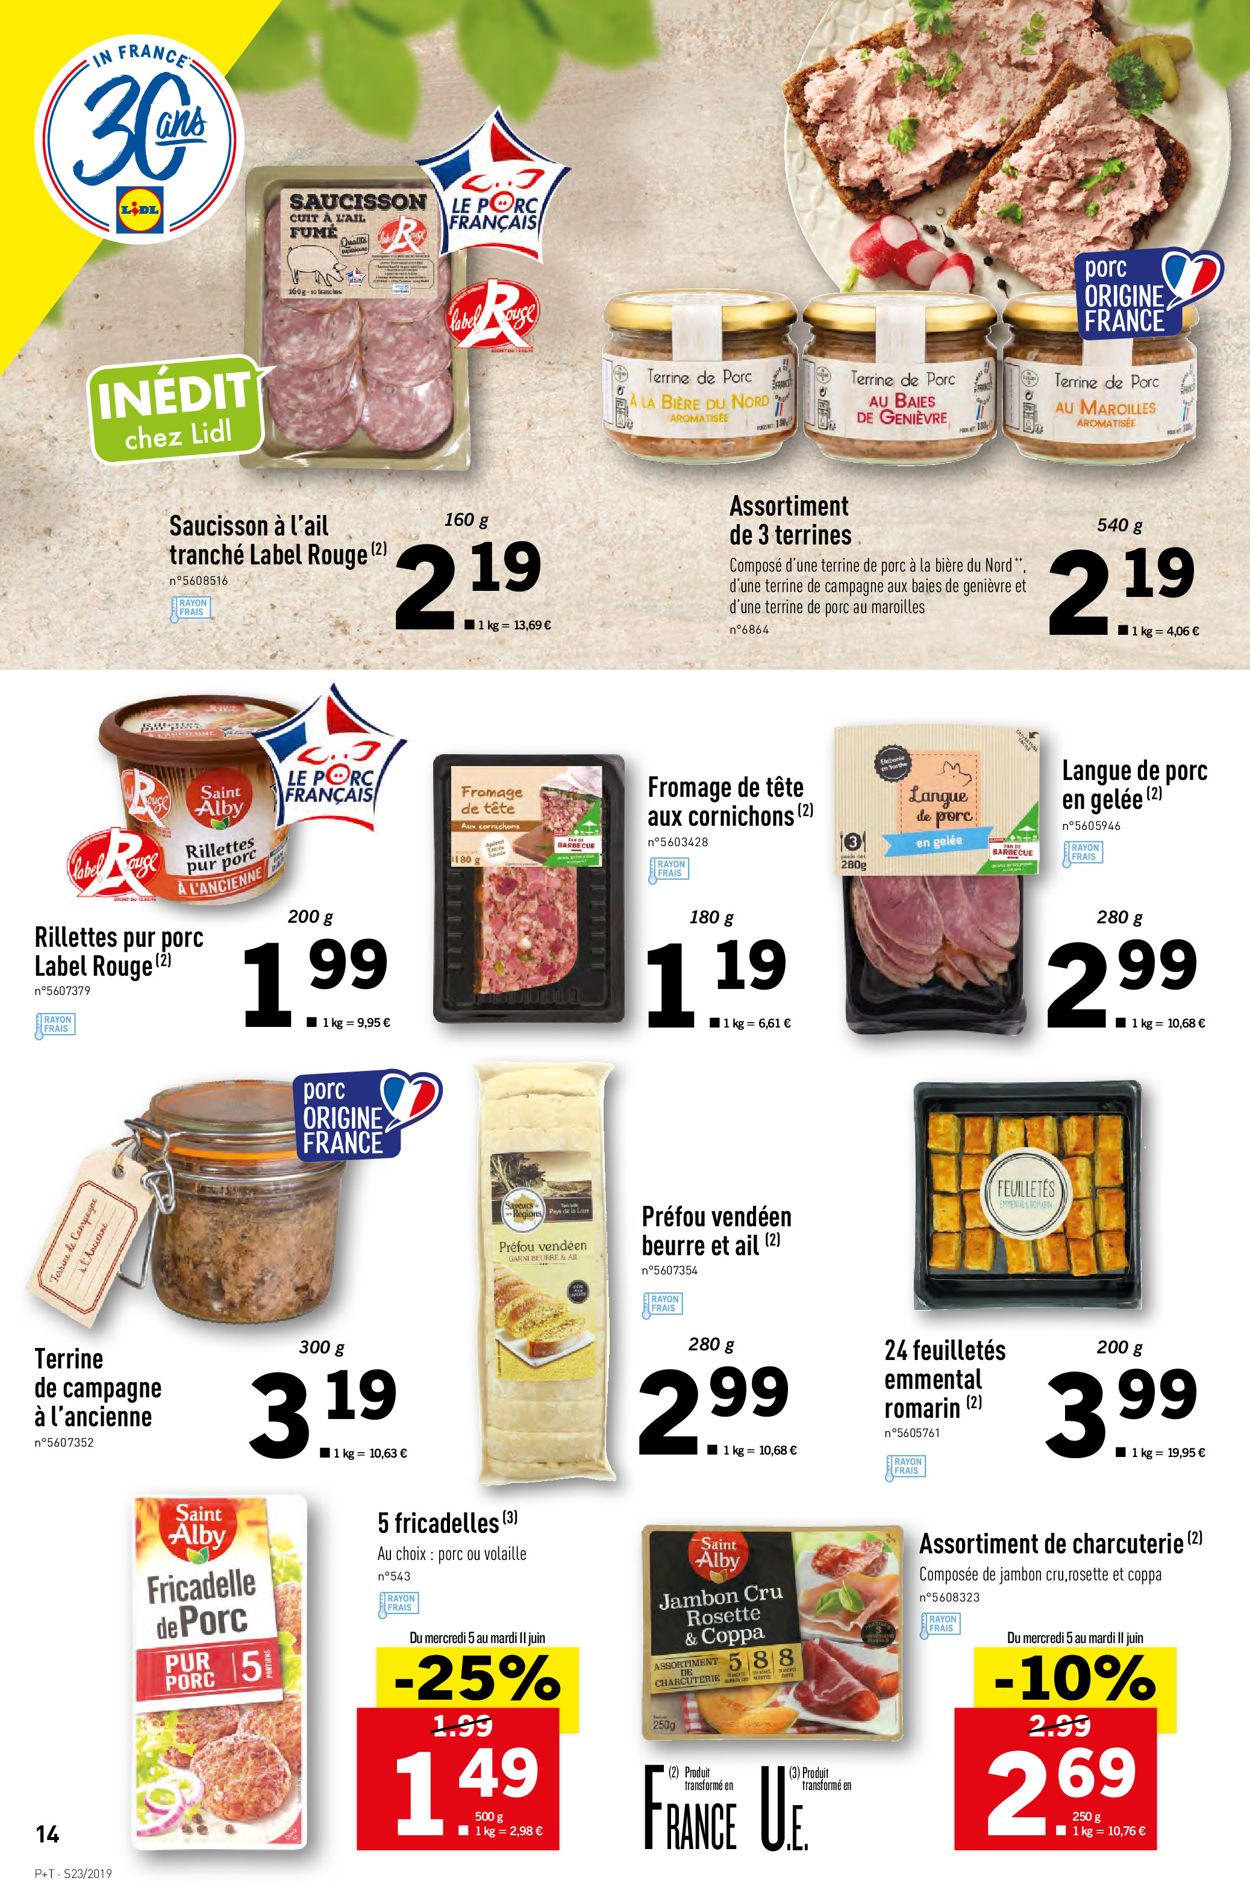 Lidl Catalogue - 05.06-11.06.2019 (Page 14)